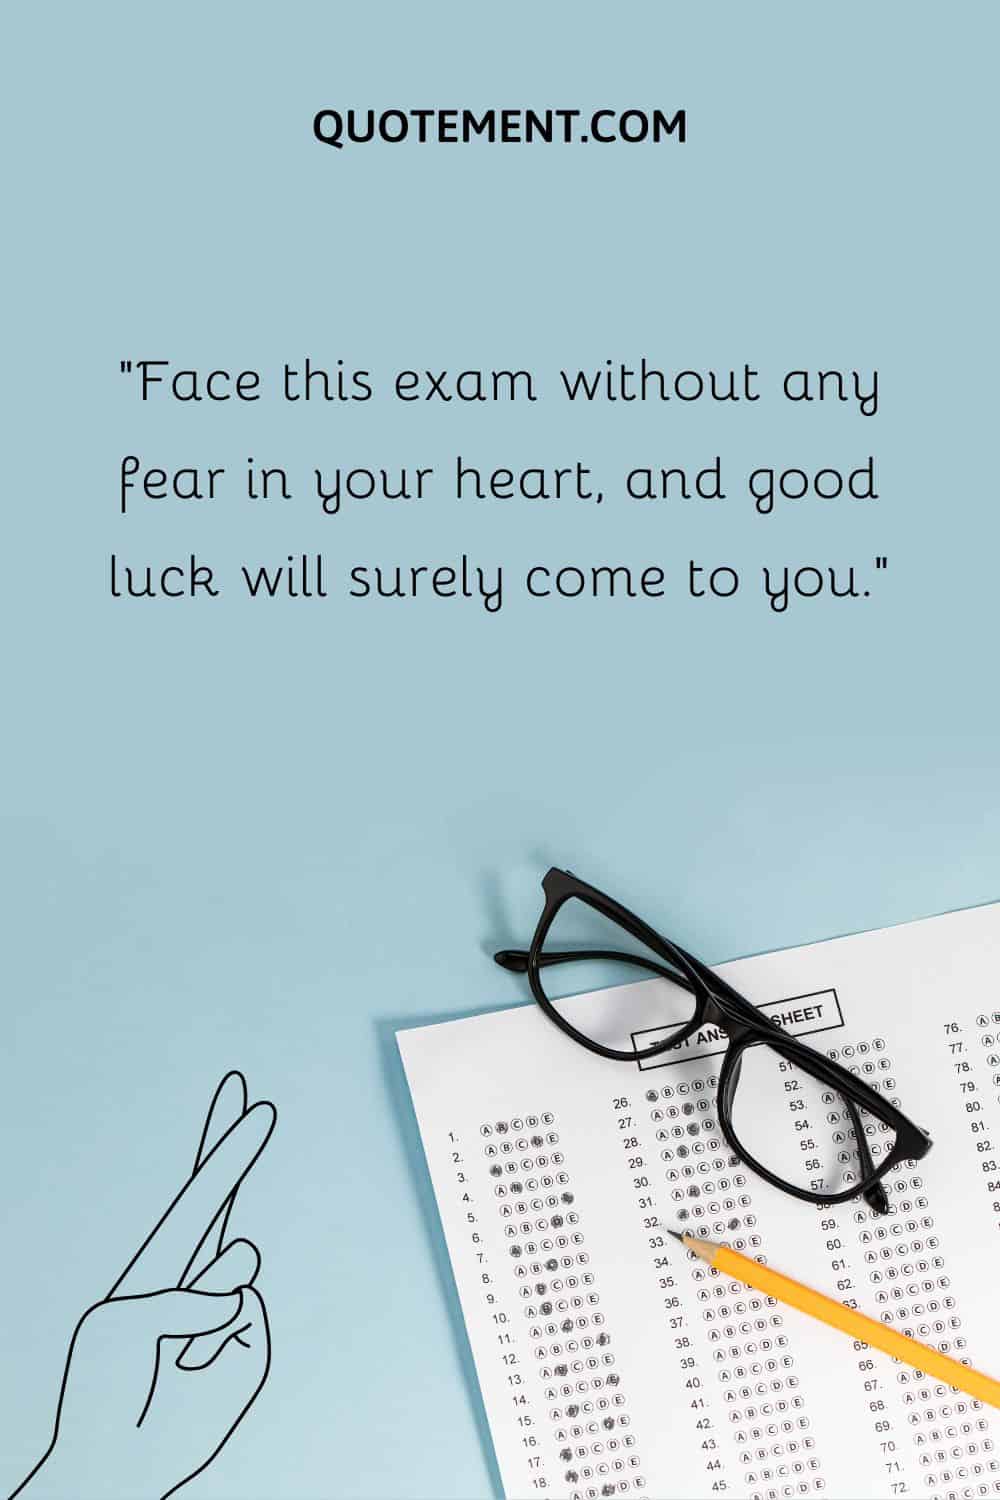 Face this exam without any fear in your heart